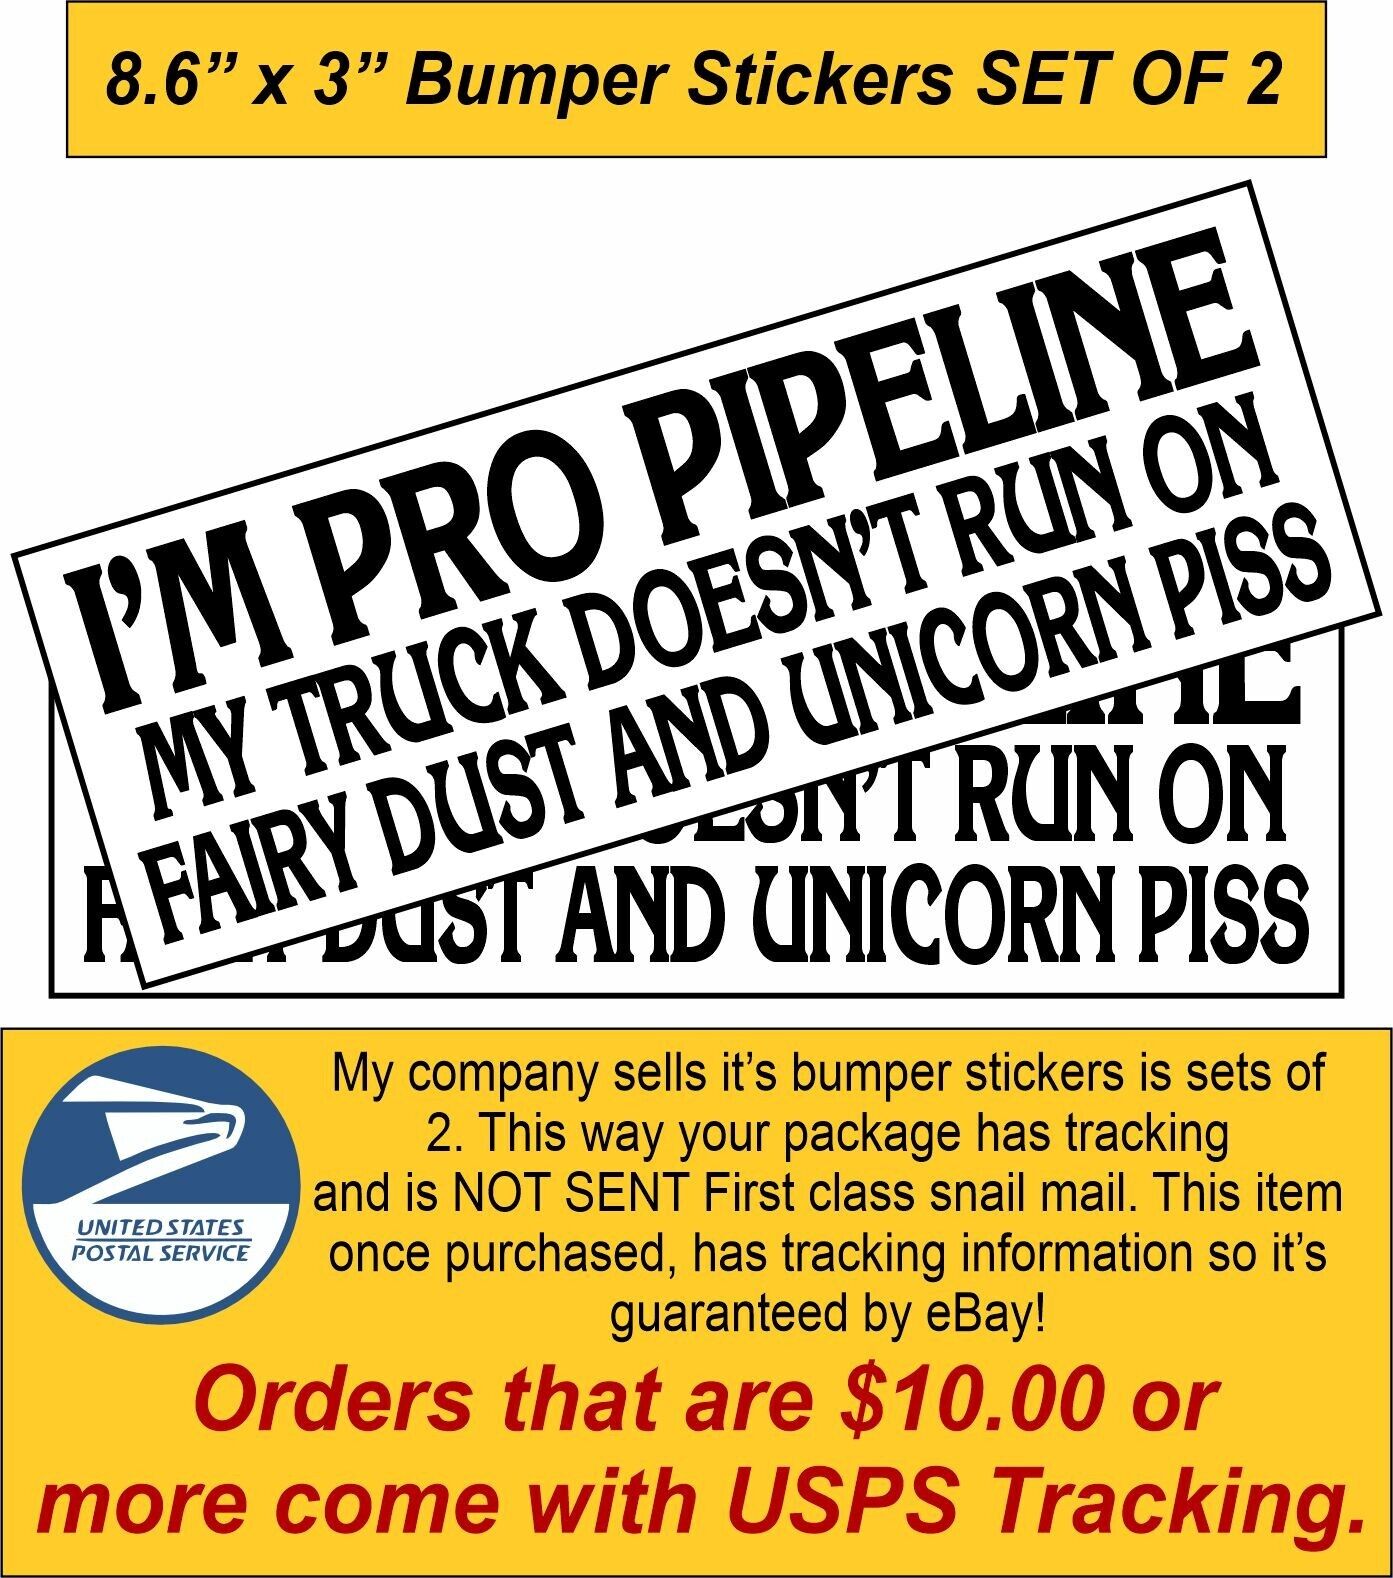 I'm Pro Pipeline Truck Doesn't Run On Fairy Dust Unicorn Piss SET OF 2 Decals